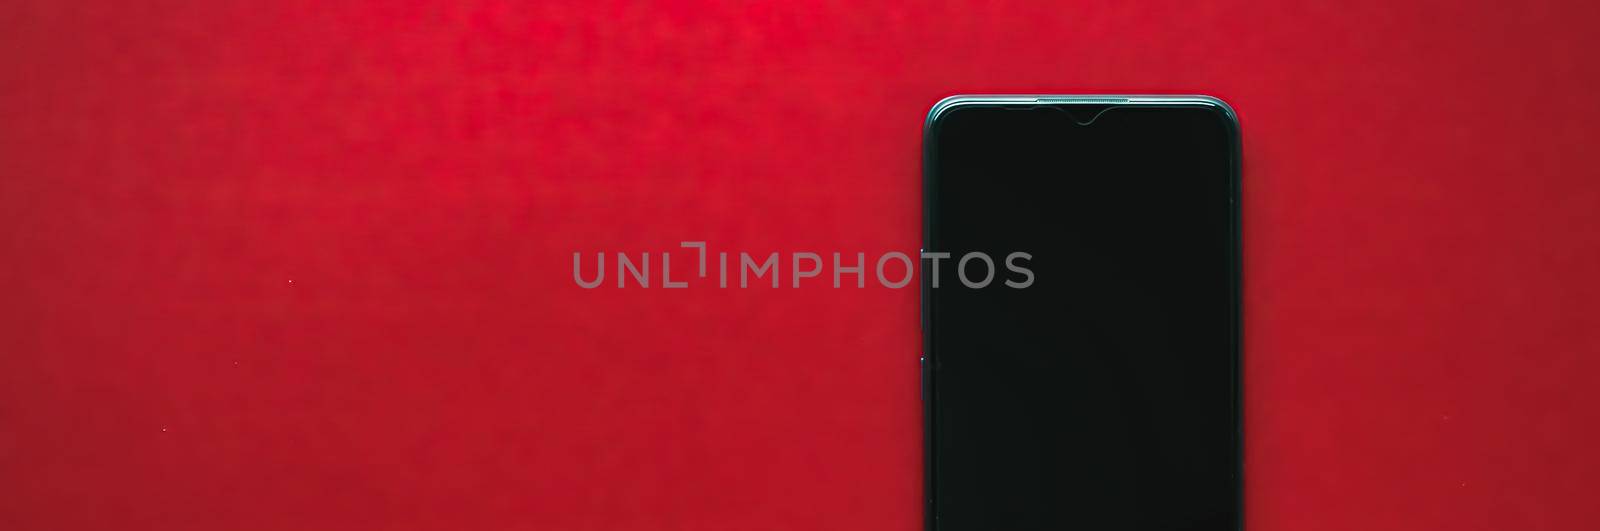 Mobile app design or smartphone screen flatlay concept. Mobile phone as new model presentation mockup or application template, brand marketing design on red background as flat lay.